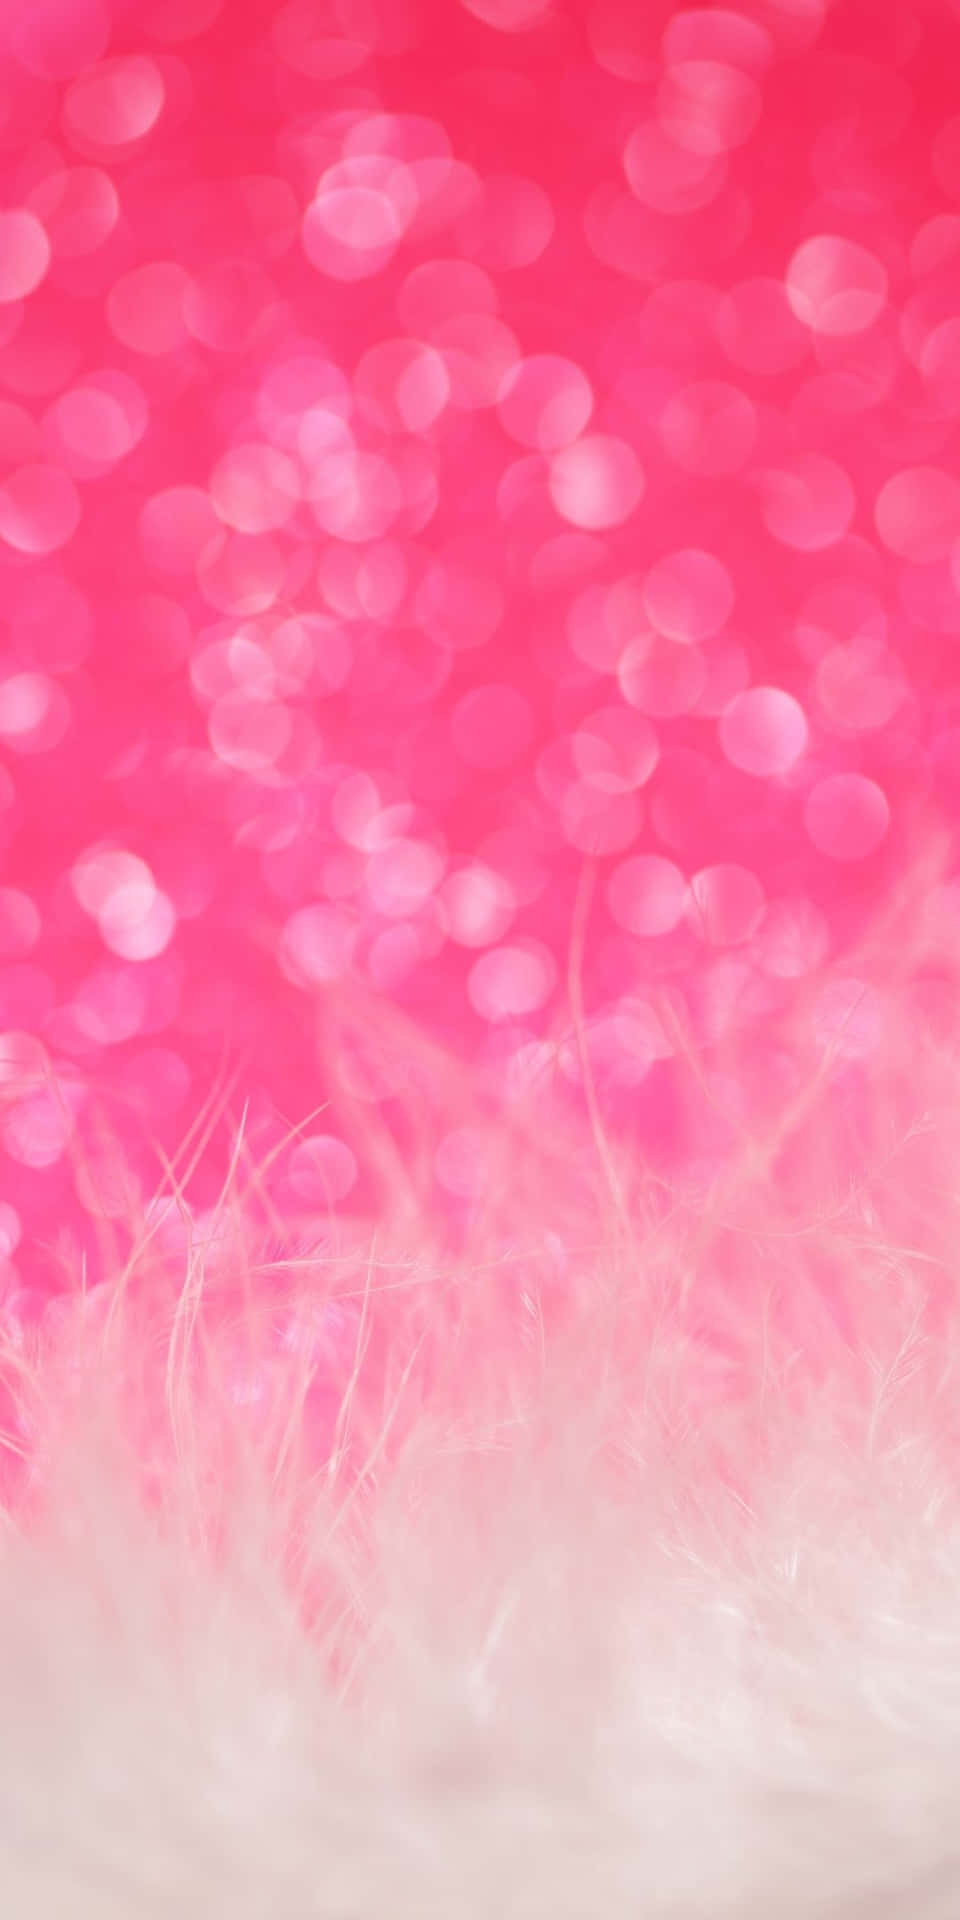 Fur Texture With Sparkly Pink Bokeh Background